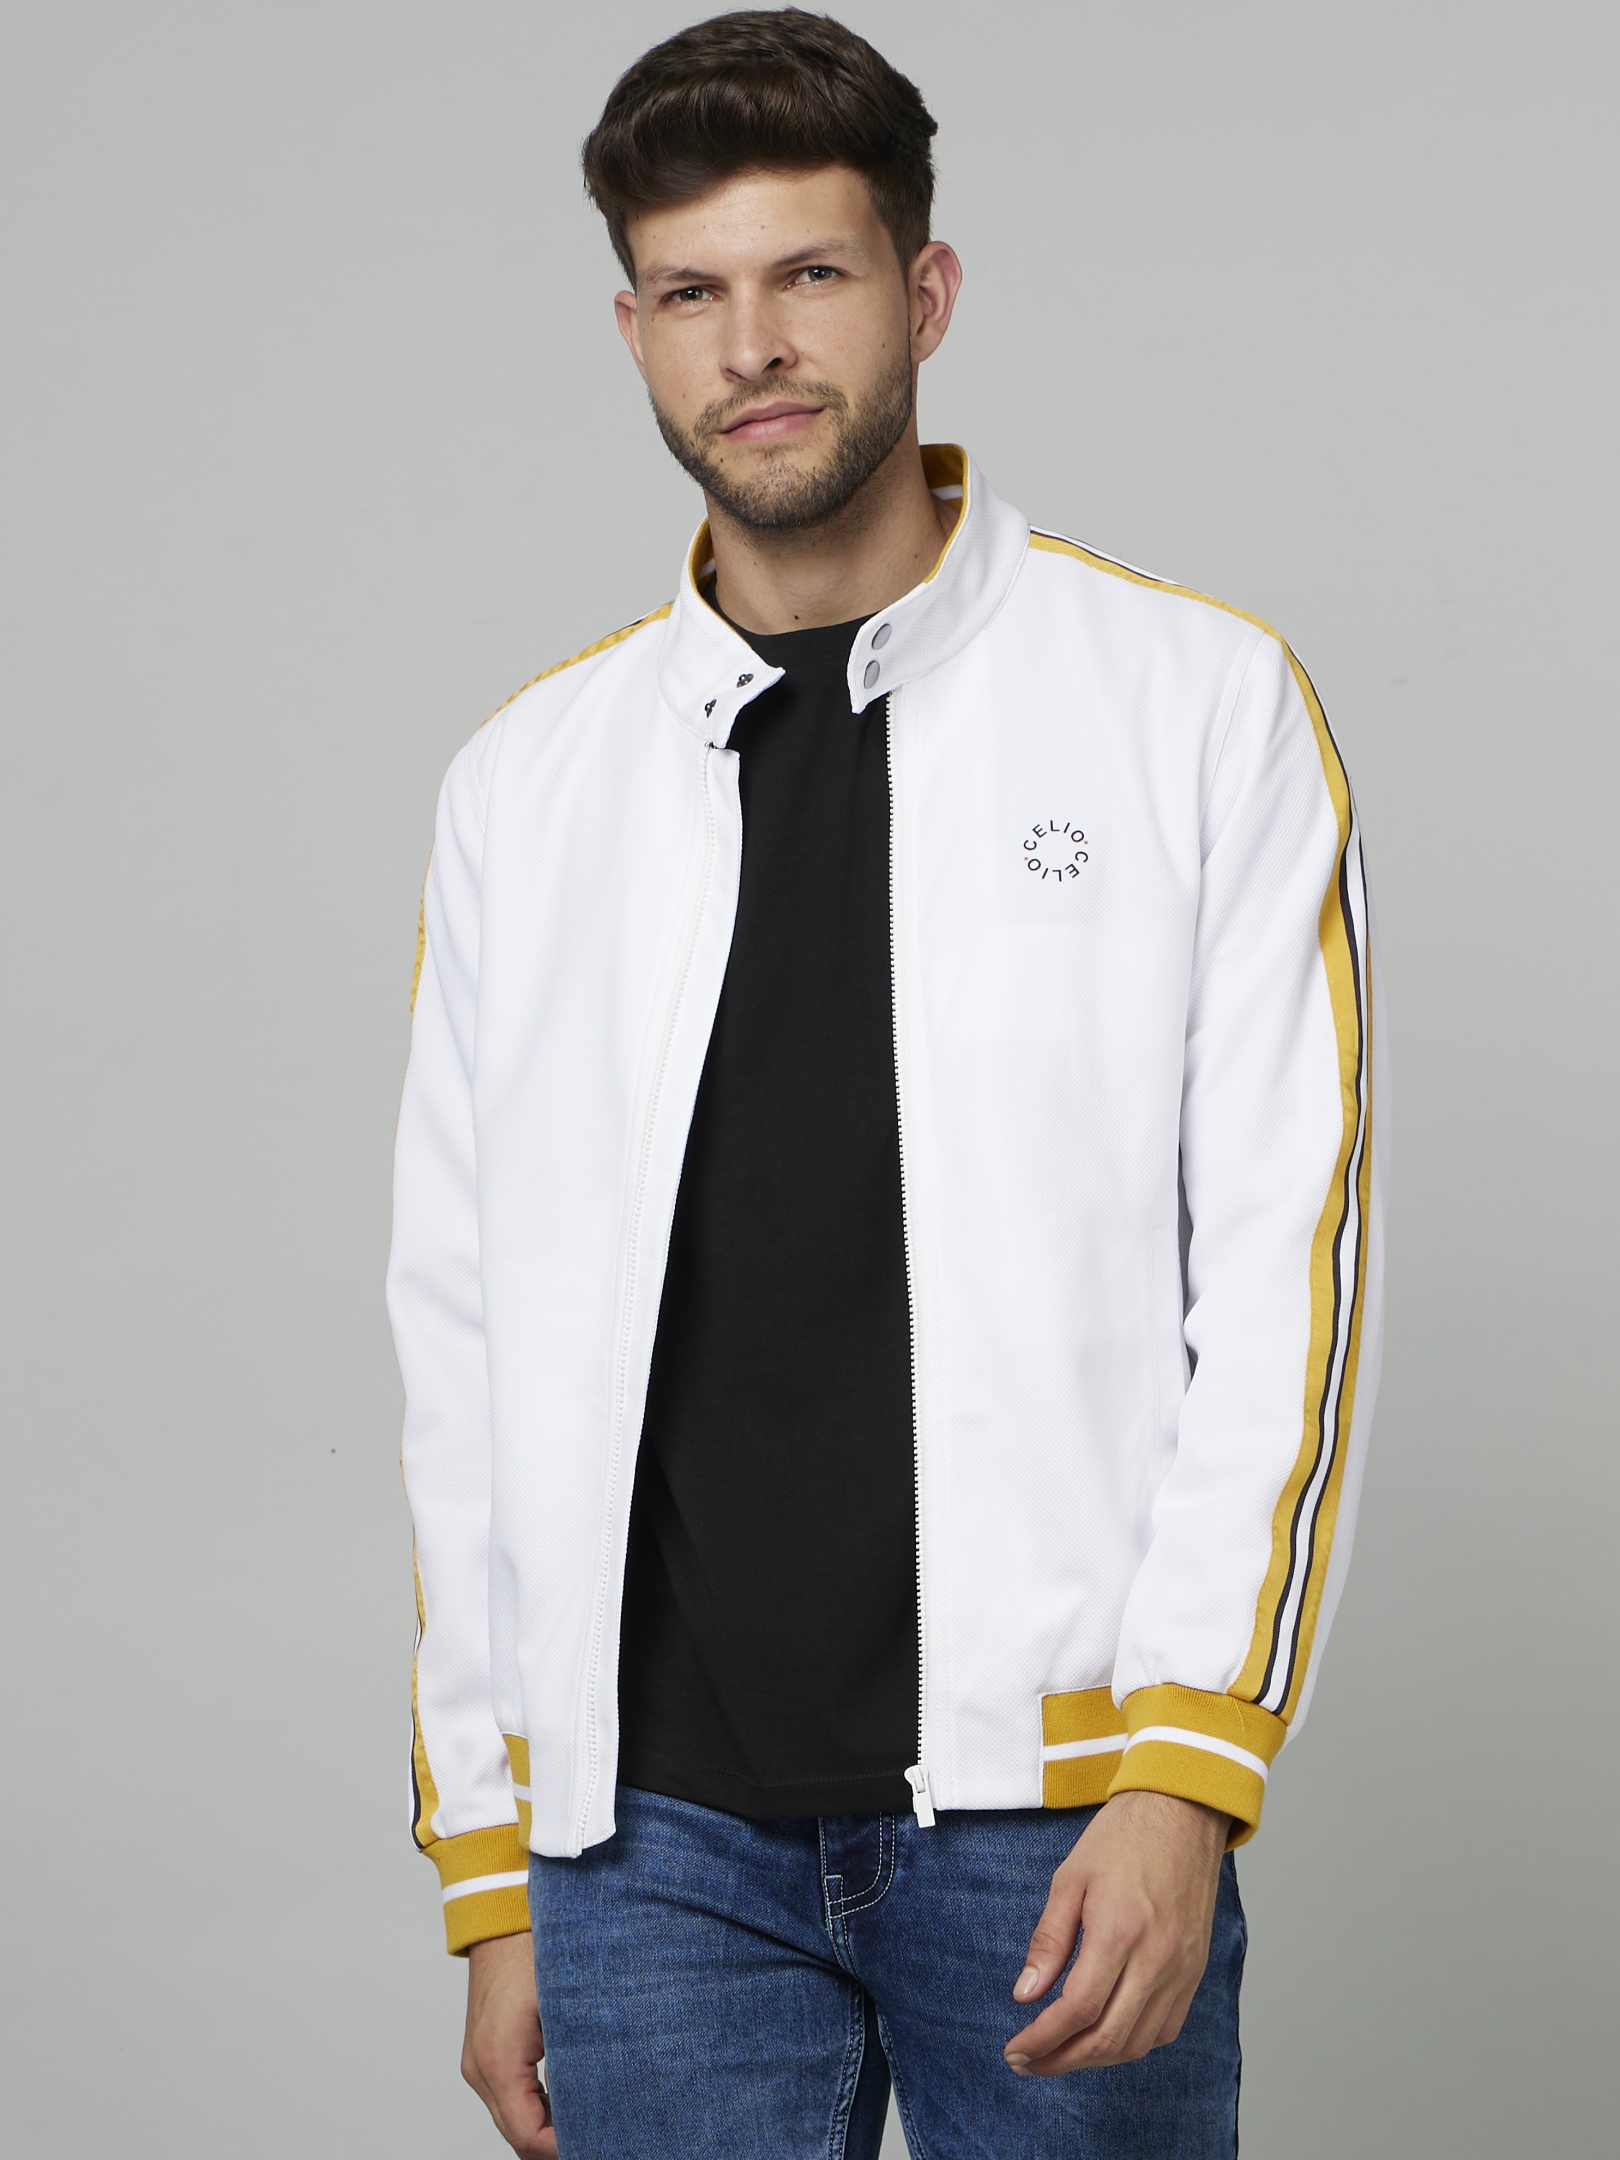 Men's White Solid Western Jackets